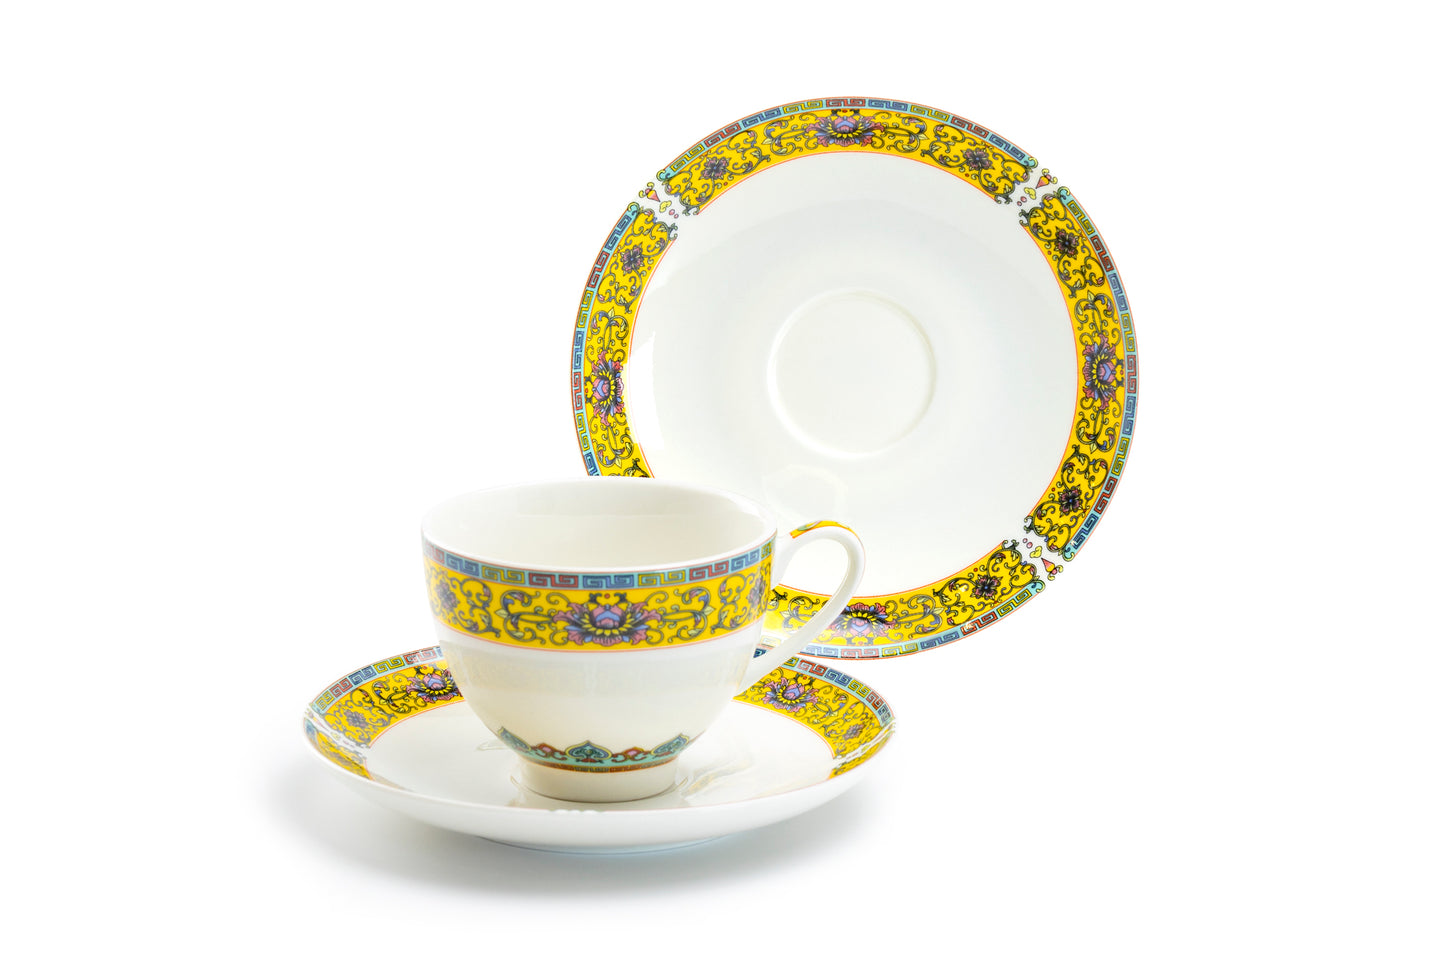 Gracie China Yellow Dynasty Fine Porcelain Tea Cup and Saucer Set